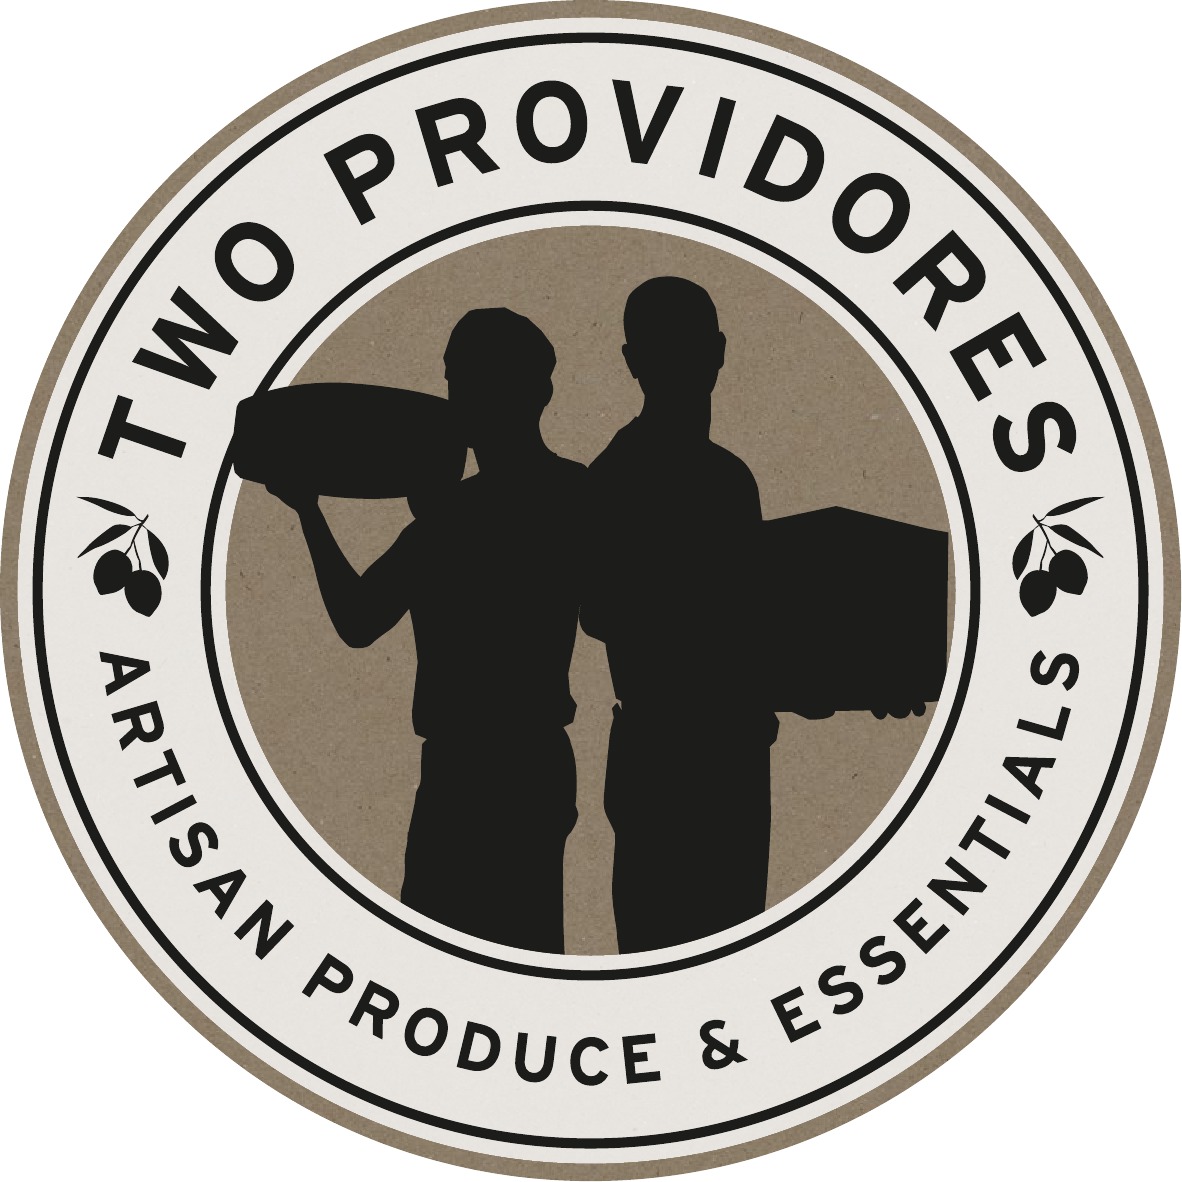 Two Providores